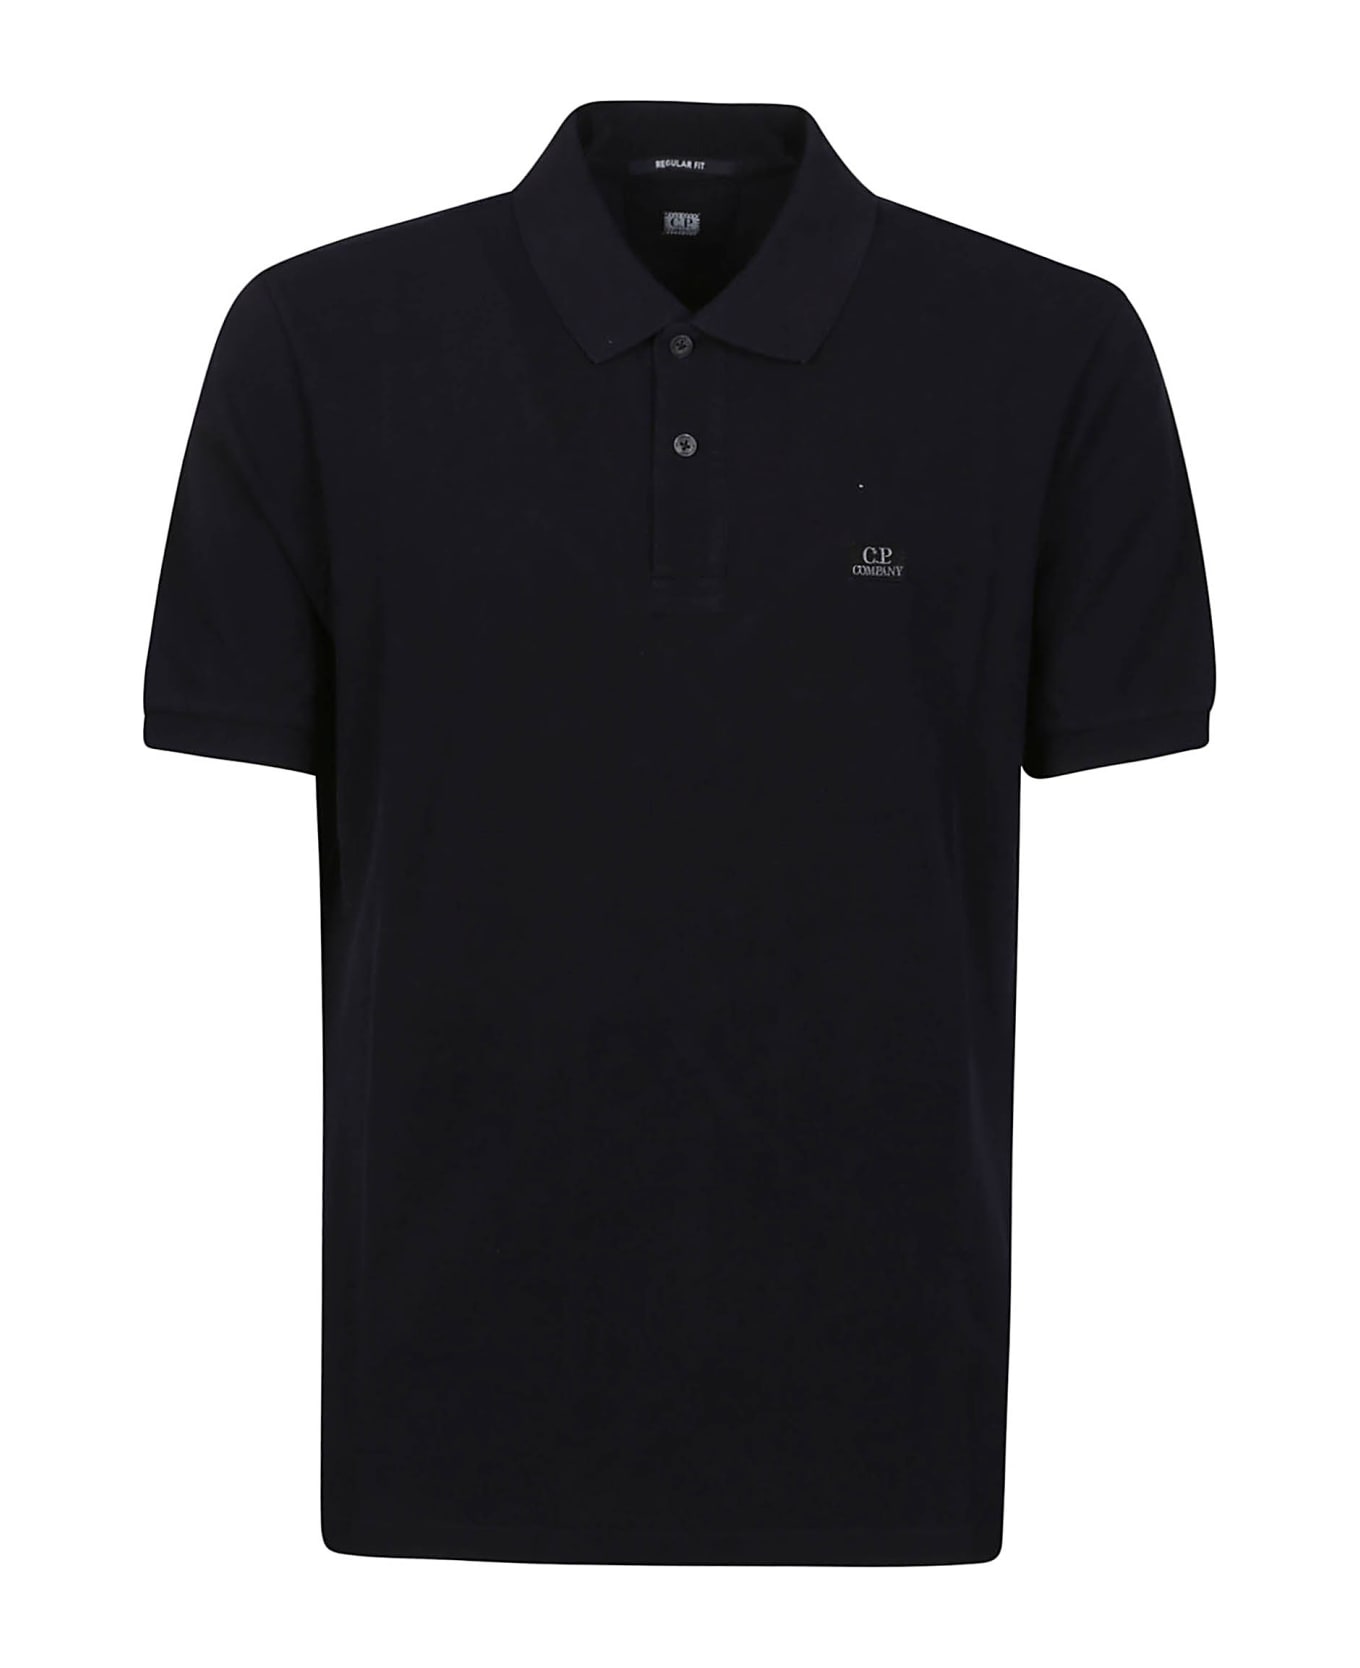 C.P. Company 24/1 Piquet Gament Dyed Short Sleeve Polo Shirt - Total Eclipse ポロシャツ